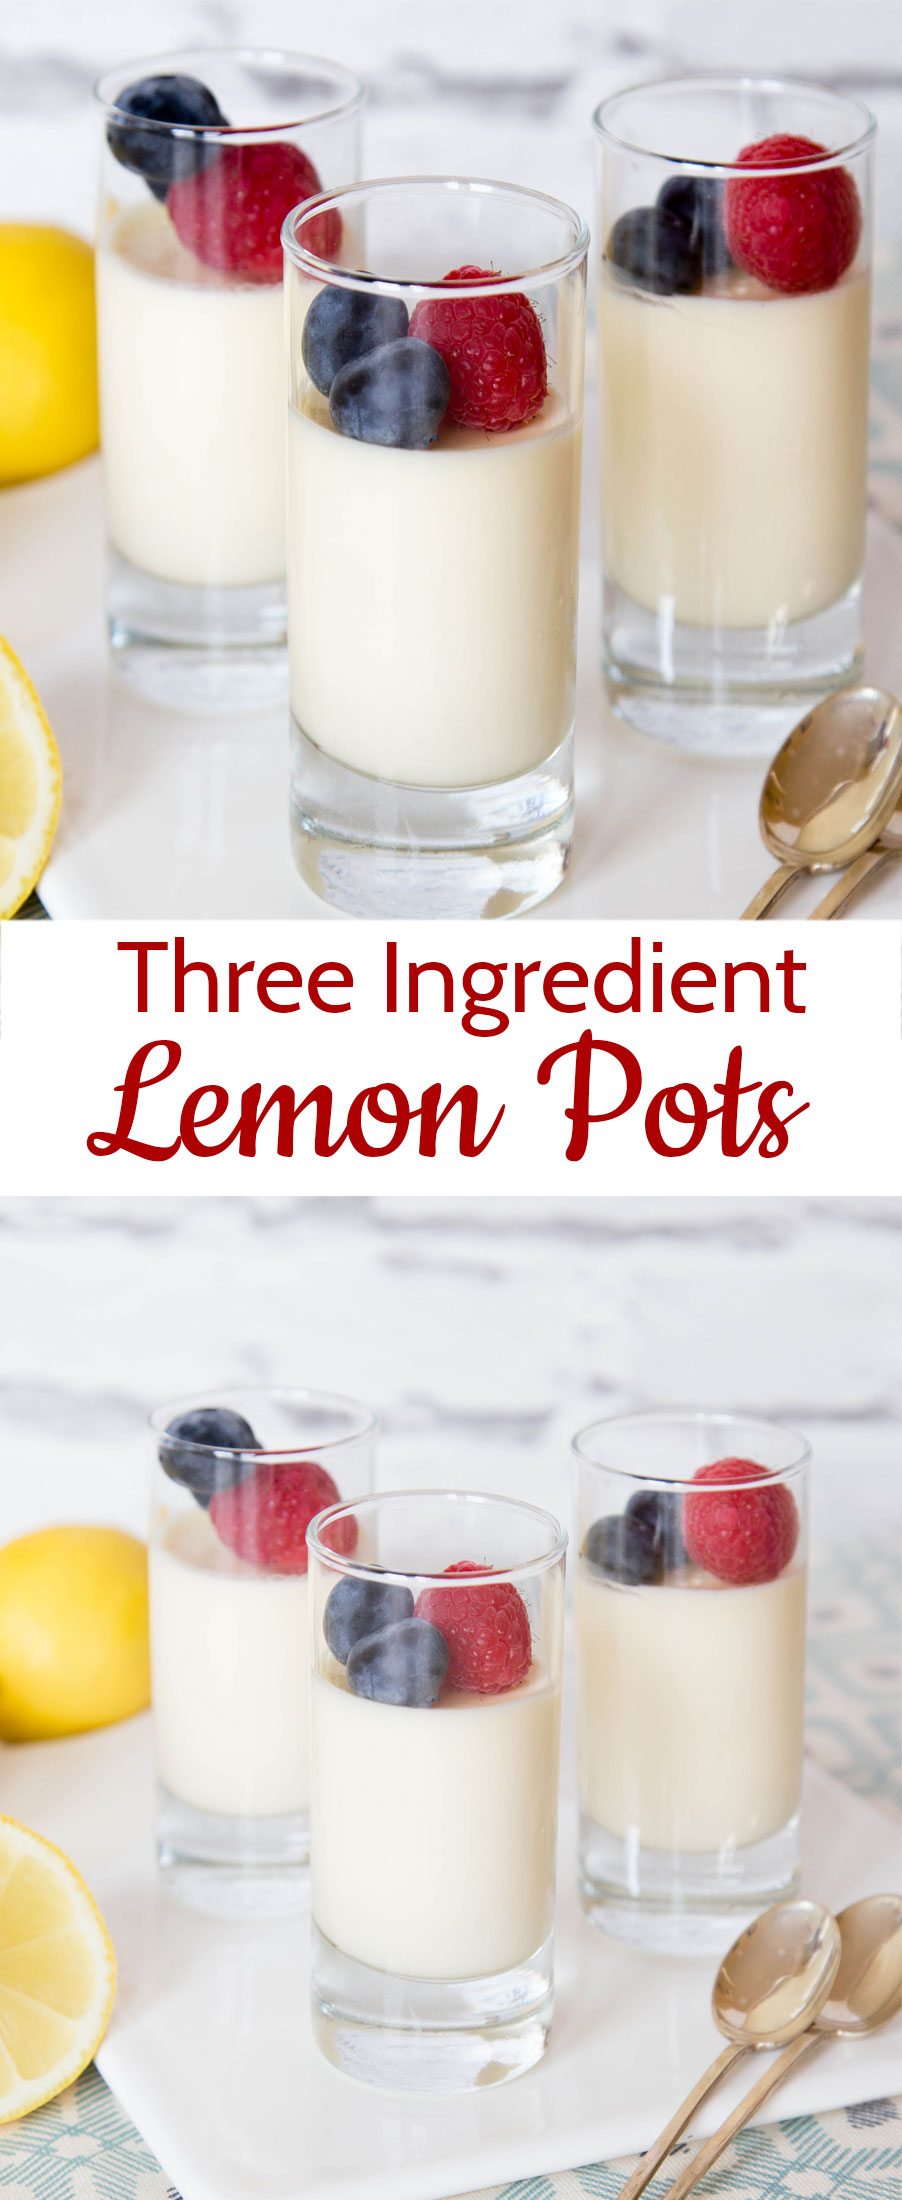 Lemon possets are rich & delicious, quick & easy, freeze well and only use 3 ingredients!